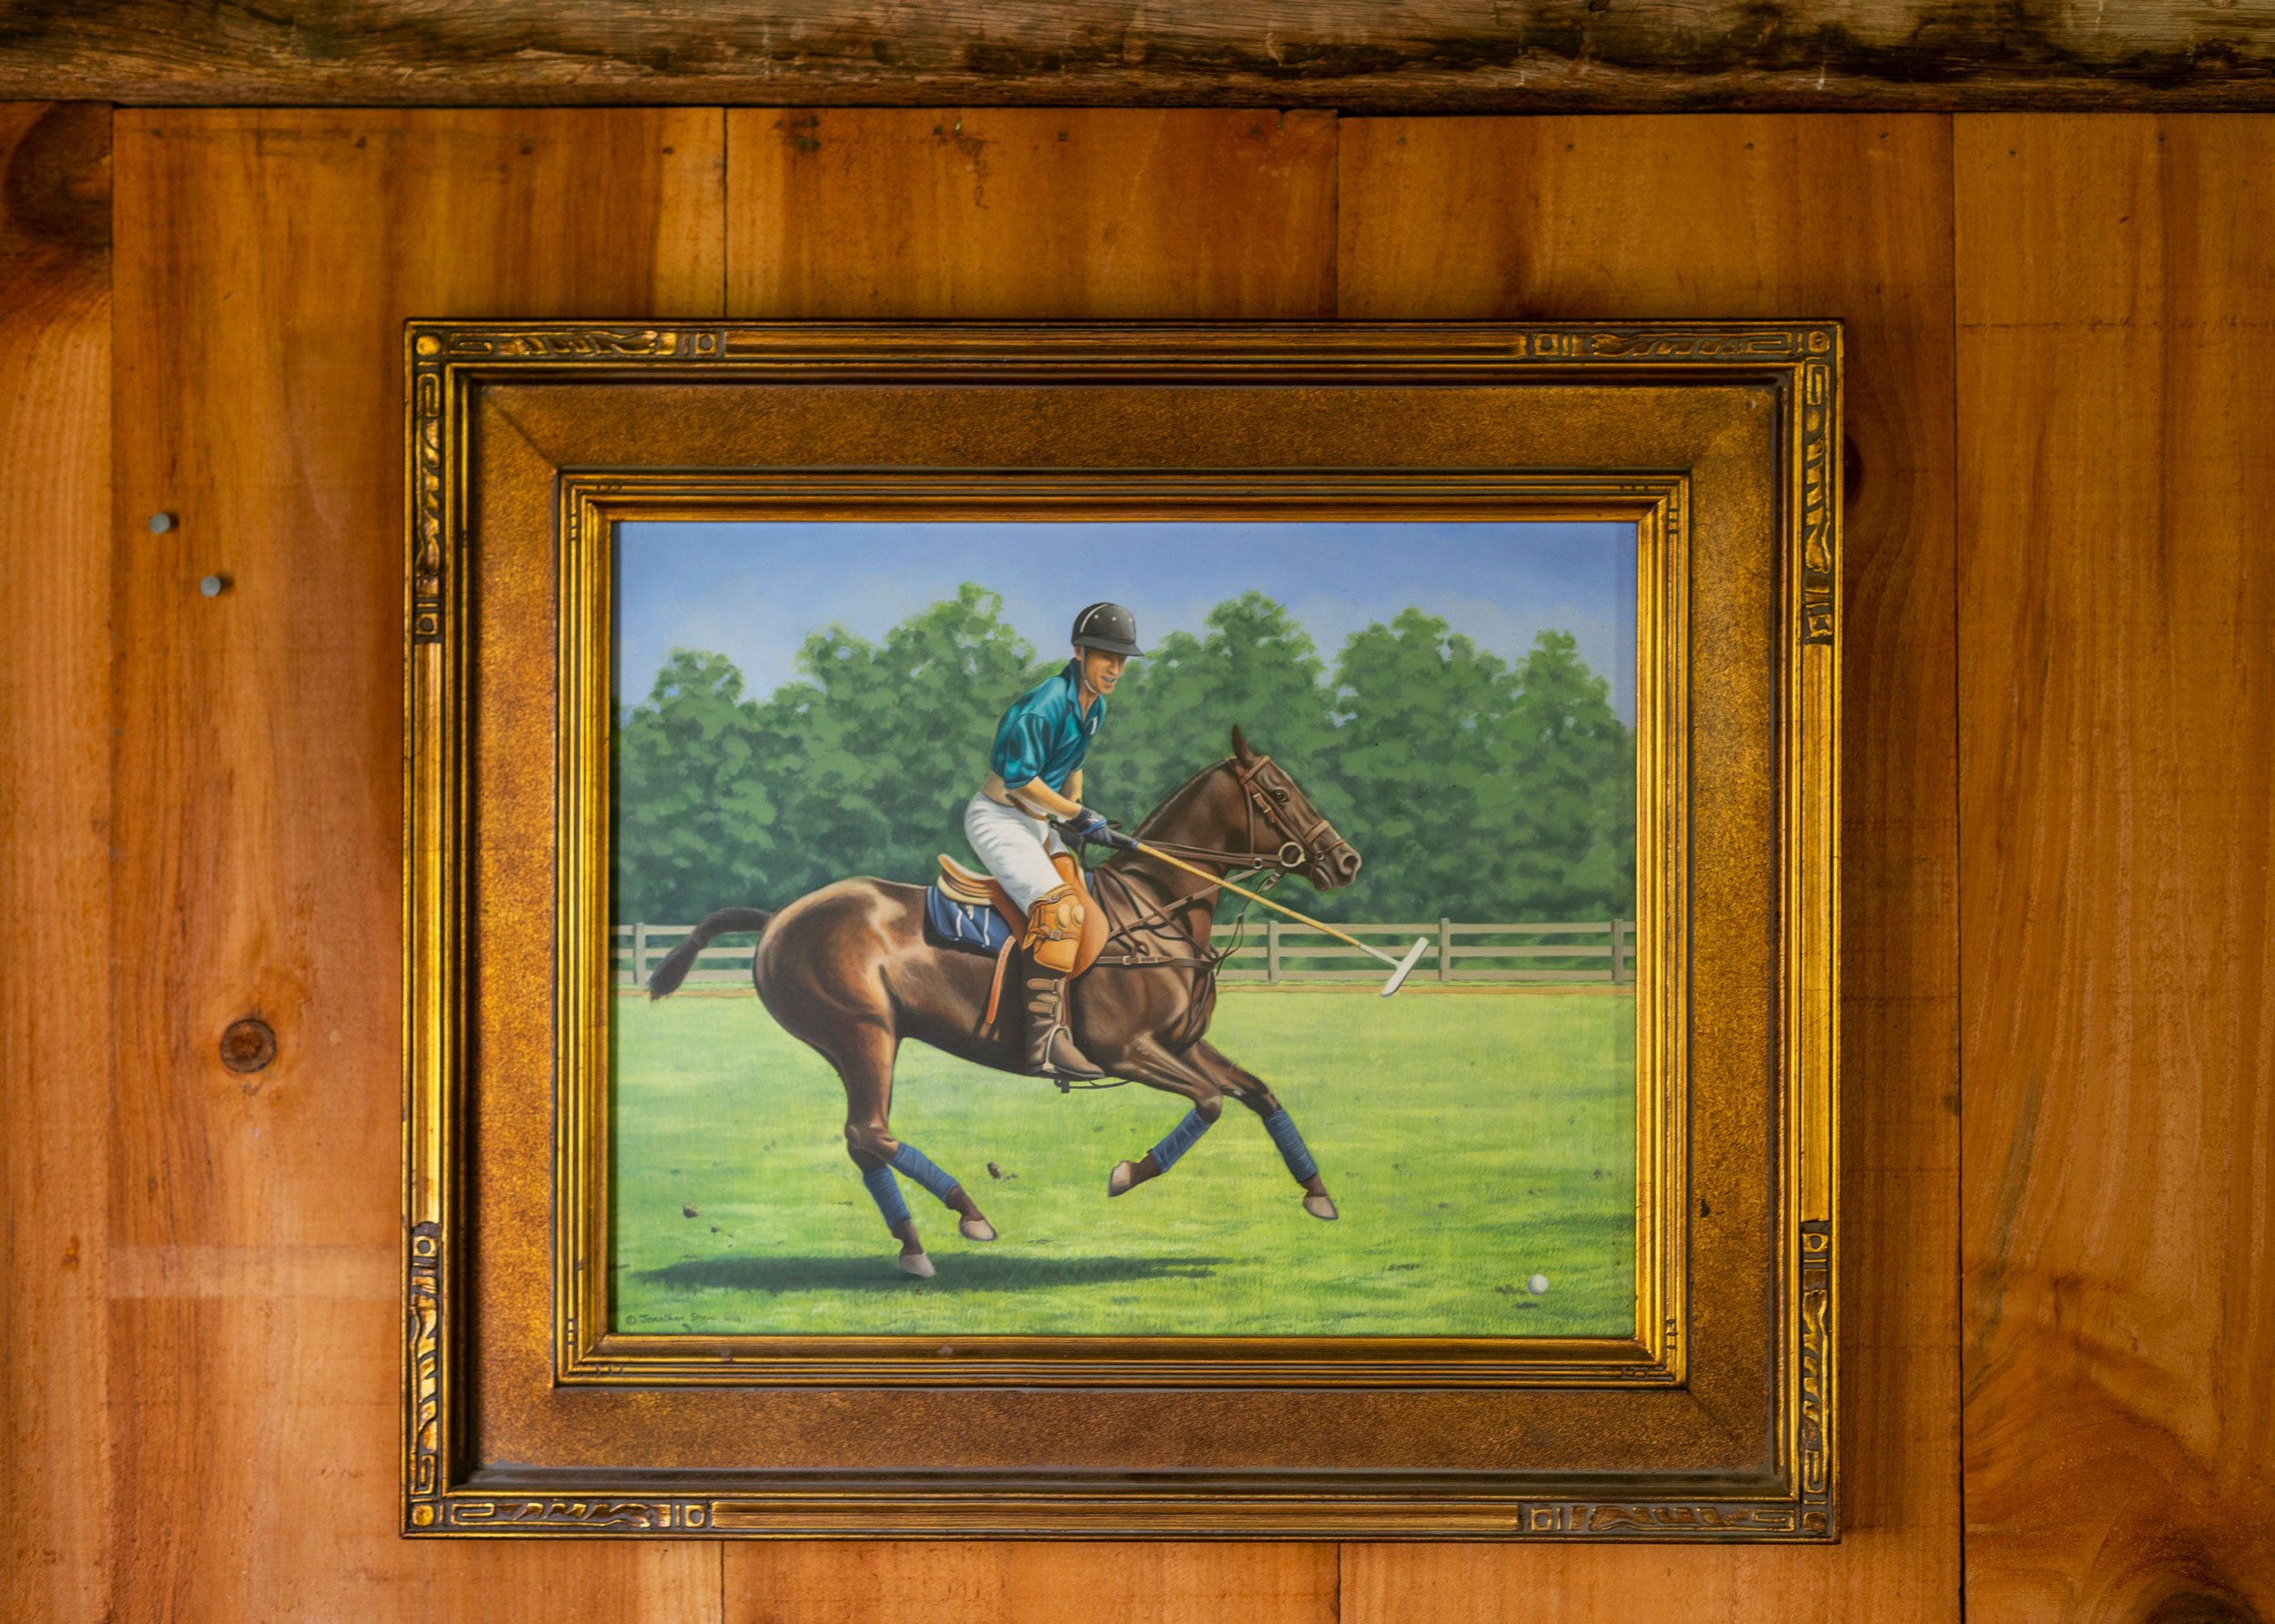 A painting by Jon shaw of a friend on one of his polo ponies at Mashomac Polo Club, New York